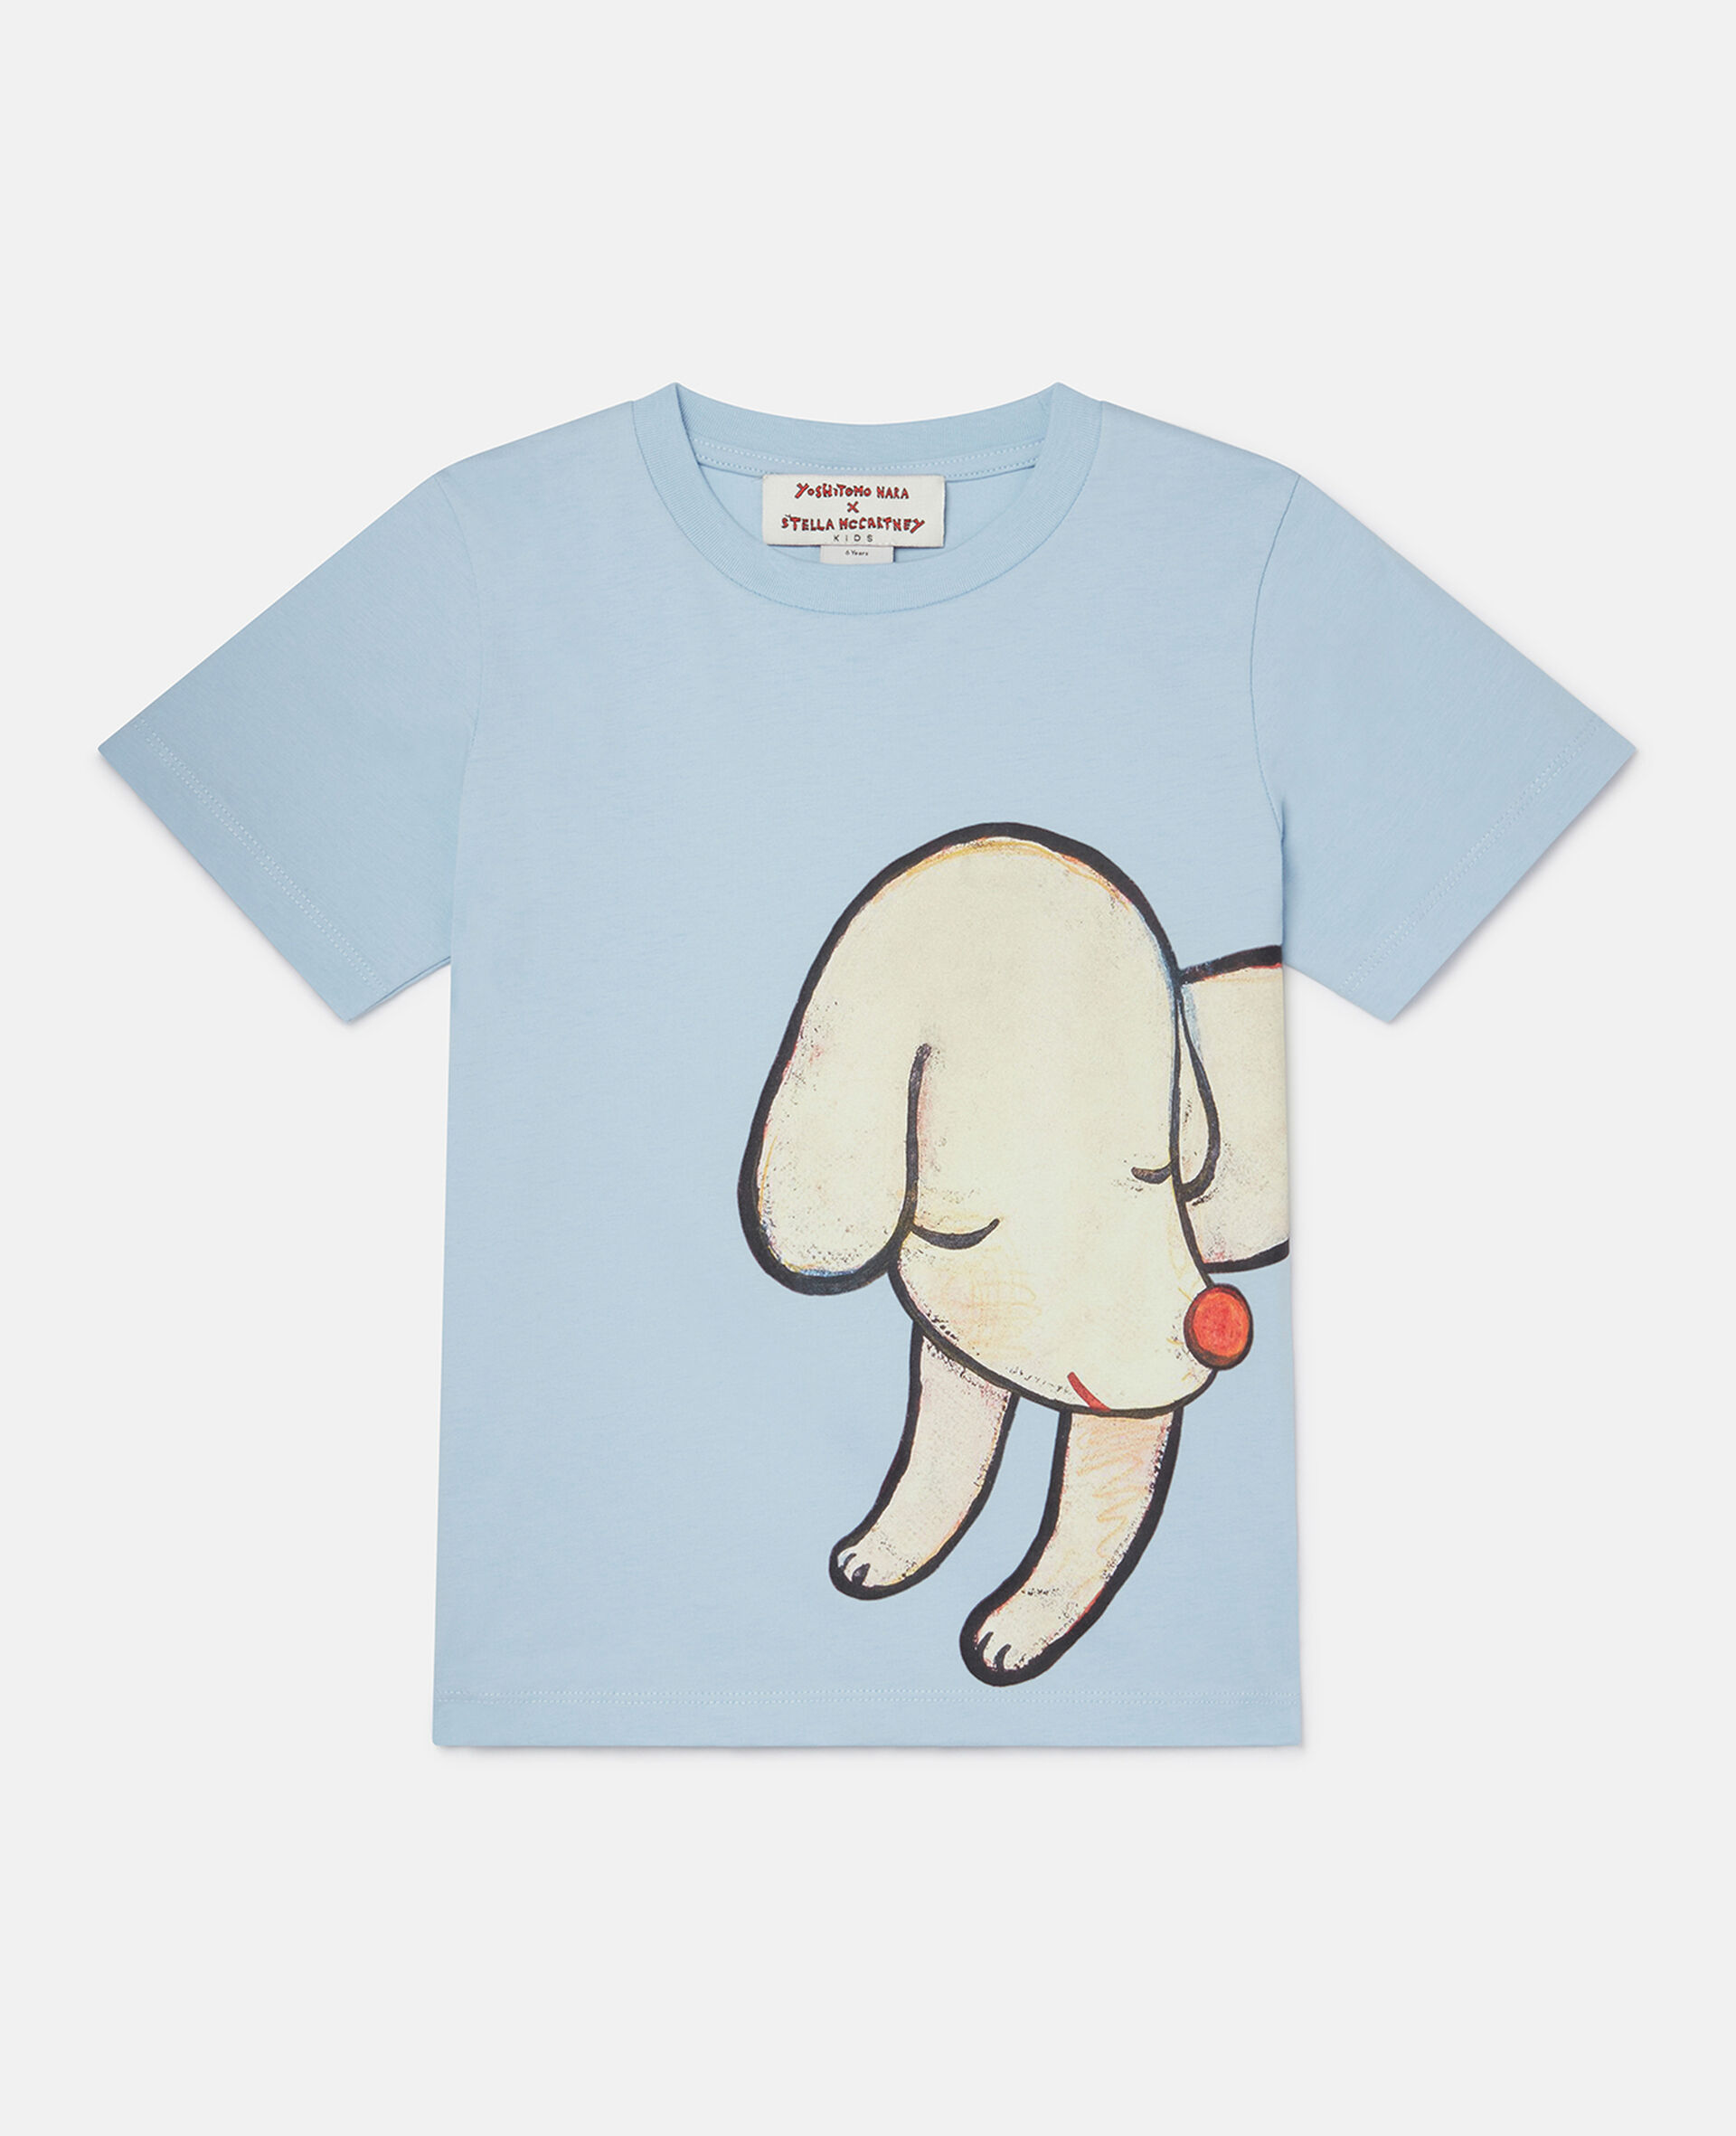 Lonesome Puppy Motif T-Shirt-Blue-large image number 0